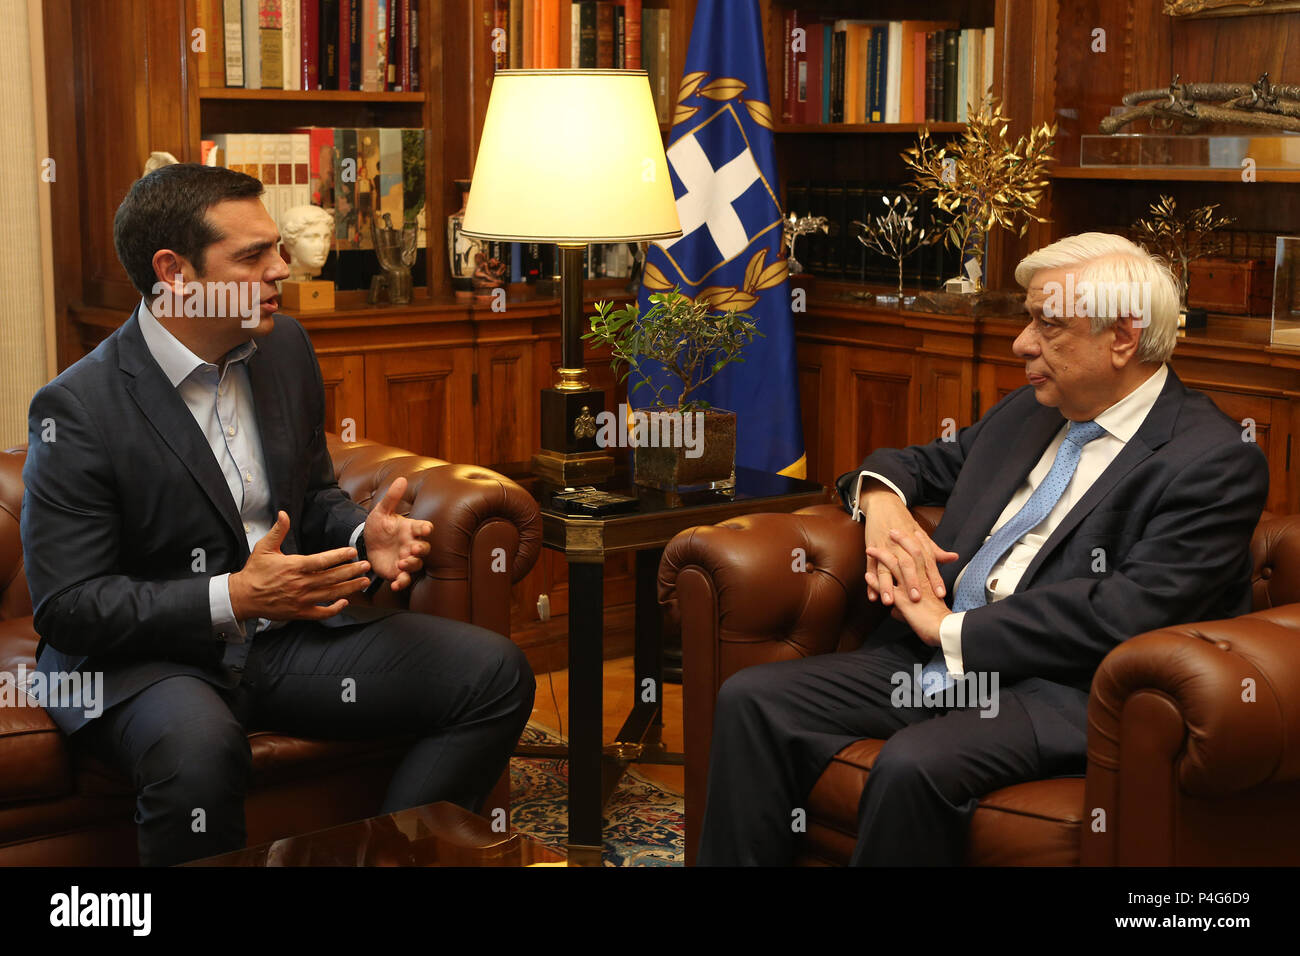 Athens, Greece. 22nd June, 2018. Greek President Prokopis Pavlopoulos (R) speaks with the Greek Prime Minister Alexis Tsipras during their meeting at the Presidential office, in Athens, Greece, on June 22, 2018. Greece's political leadership warmly welcomed on Friday Eurogroup's 'historic decision' on the Greek debt, which opens the way for the exit from the bailouts era this summer after eight years of debt crisis. Credit: Marios Lolos/Xinhua/Alamy Live News Stock Photo